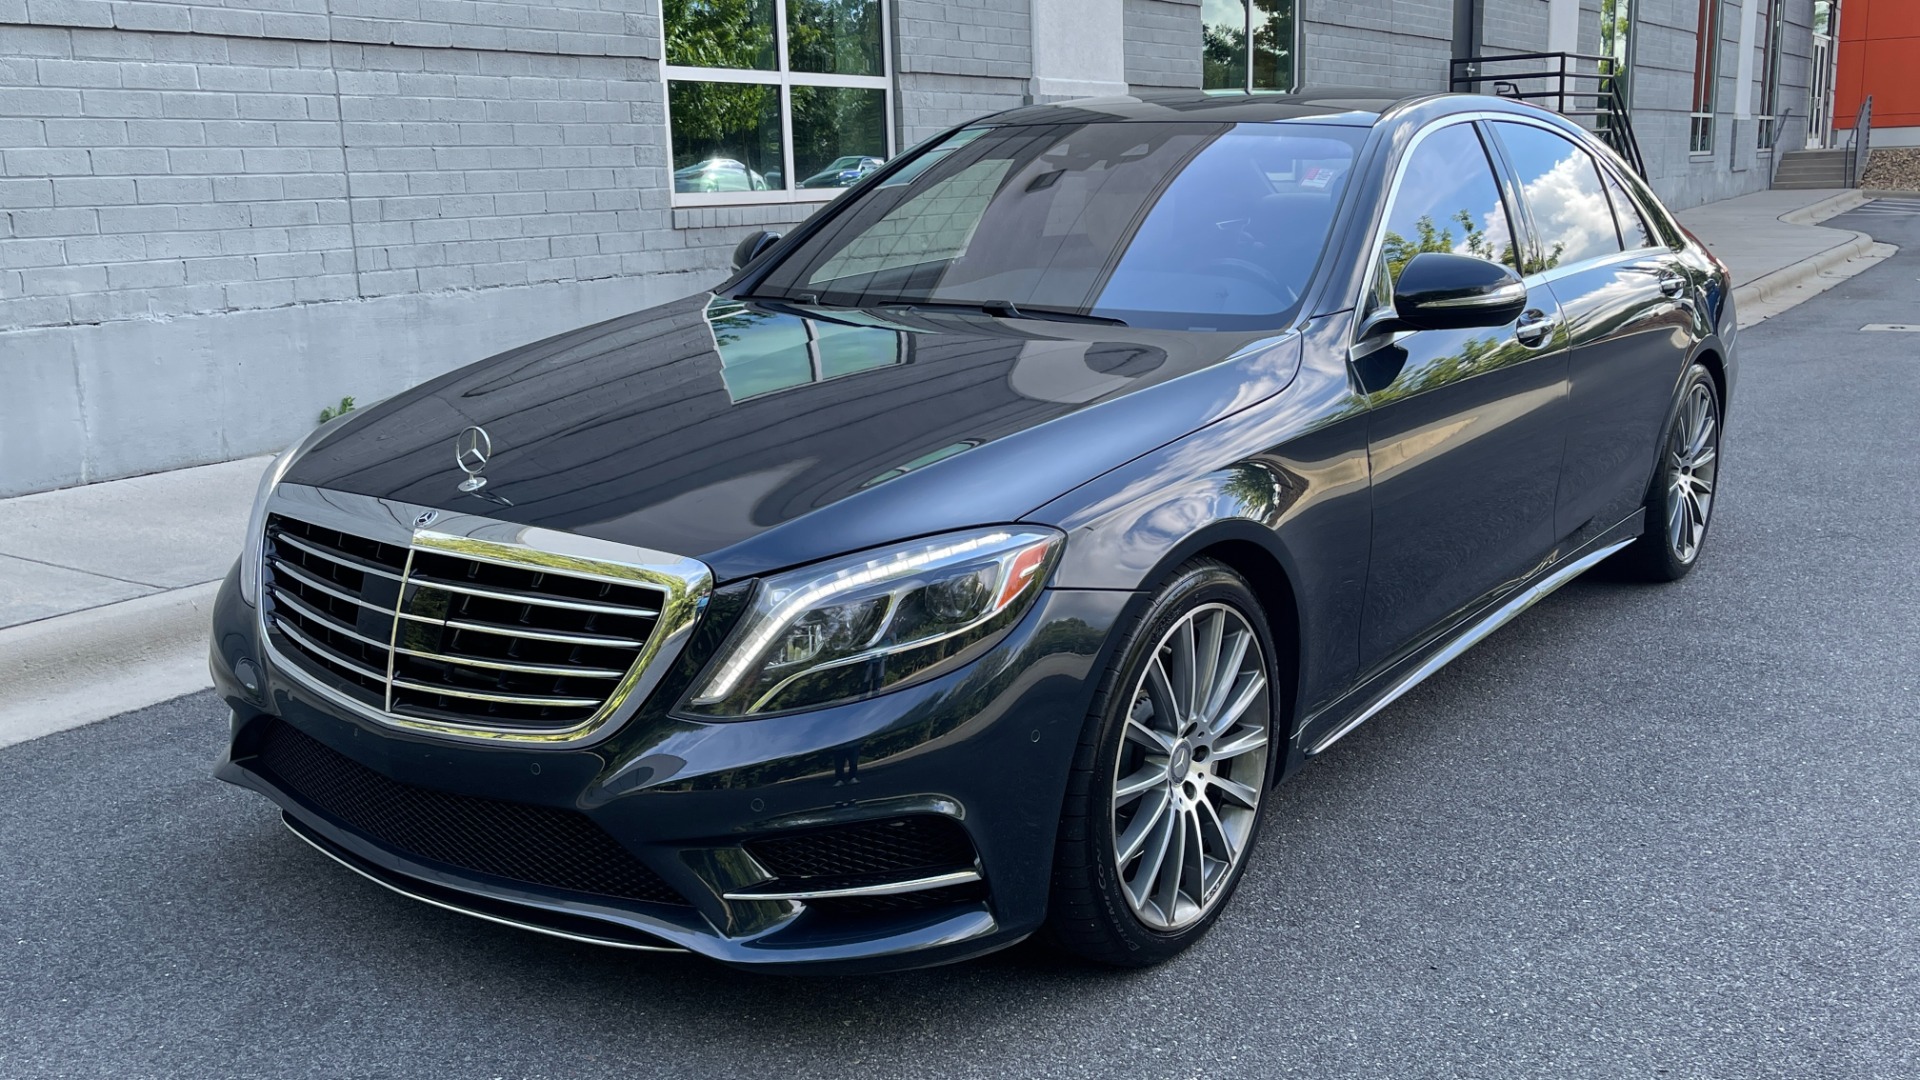 Used 2015 Mercedes-Benz S-Class S550 / REAR SEATING PACKAGE / PREMIUM / DRIVER ASSISTANCE for sale $39,995 at Formula Imports in Charlotte NC 28227 4